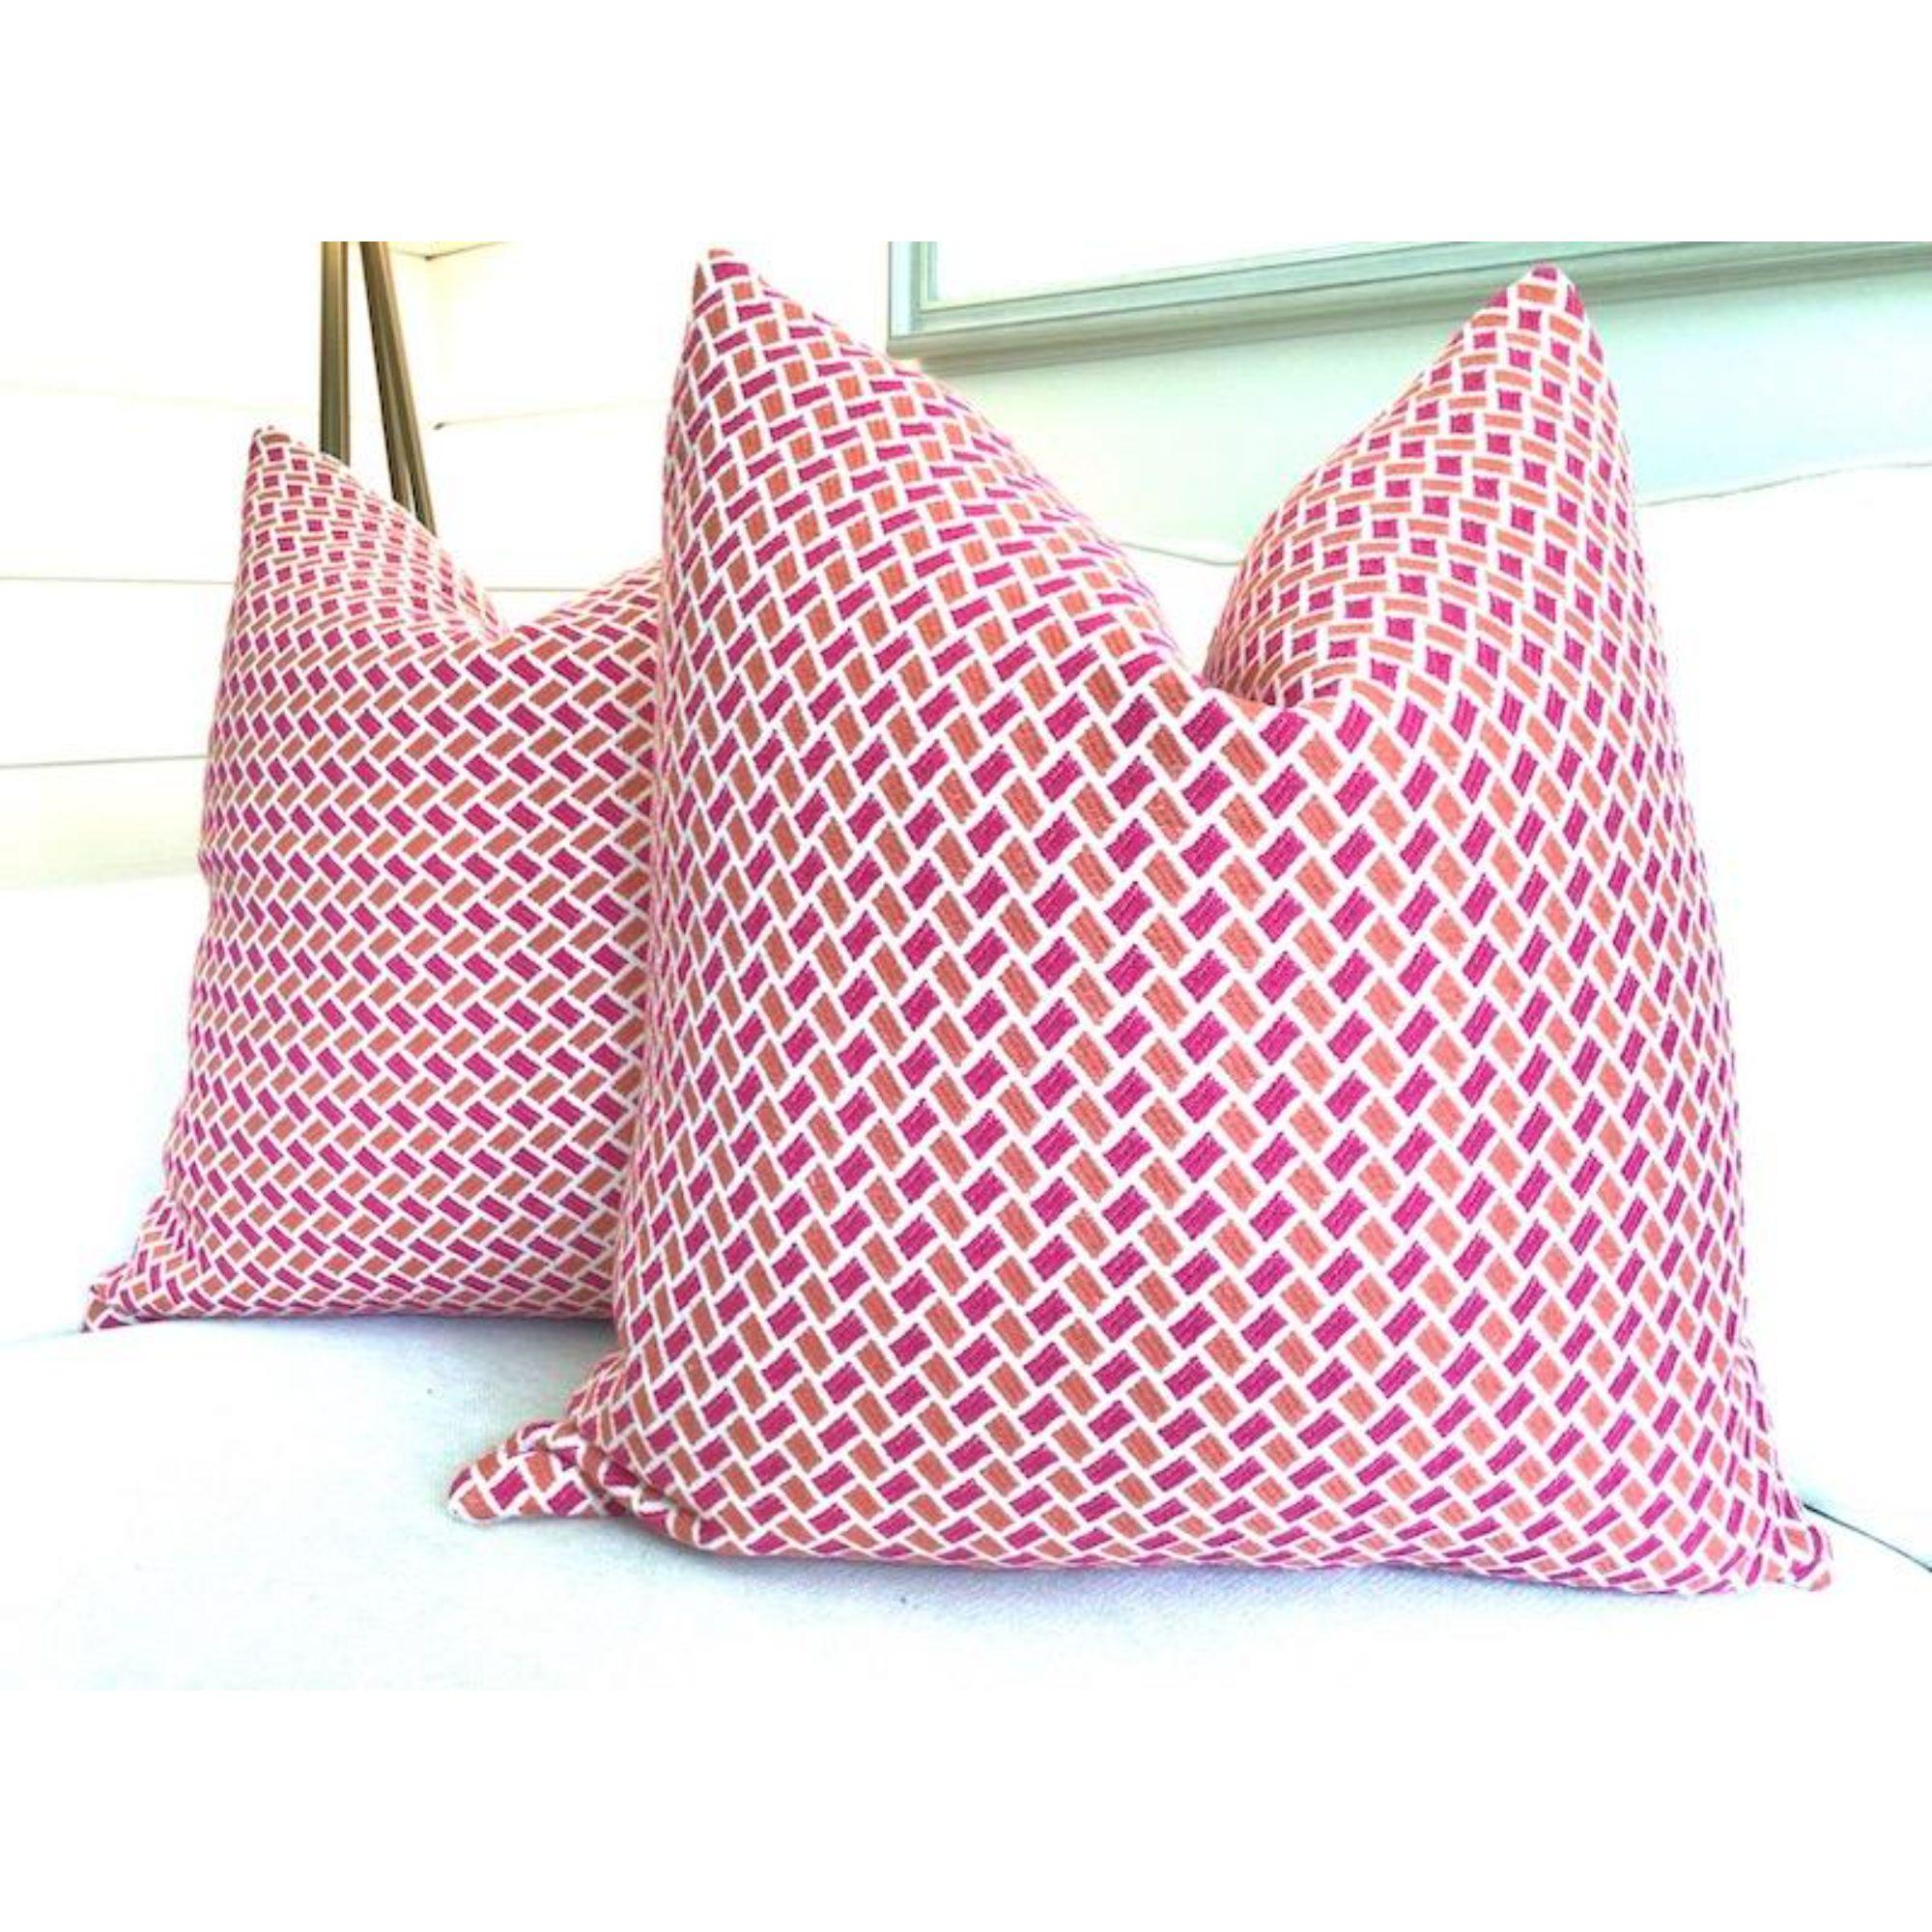 Contemporary Brunschwig & Fils “Briquetage” in Hot Pink & Coral Orange Pillows - a Pair For Sale